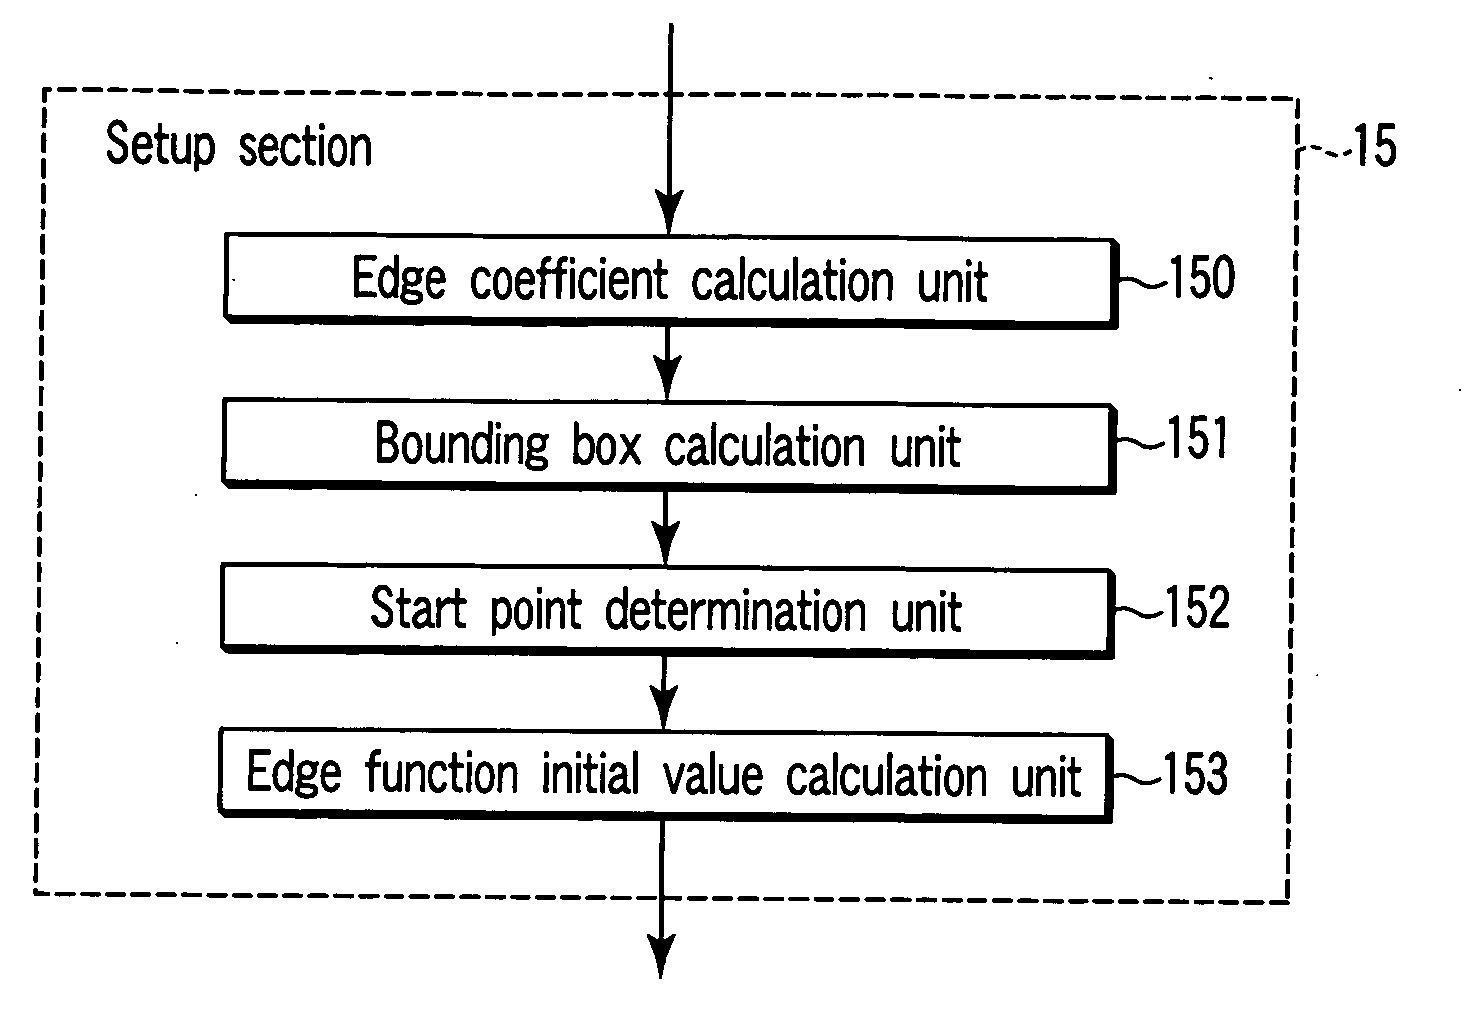 Rendering apparatus, rendering processing method and computer program product